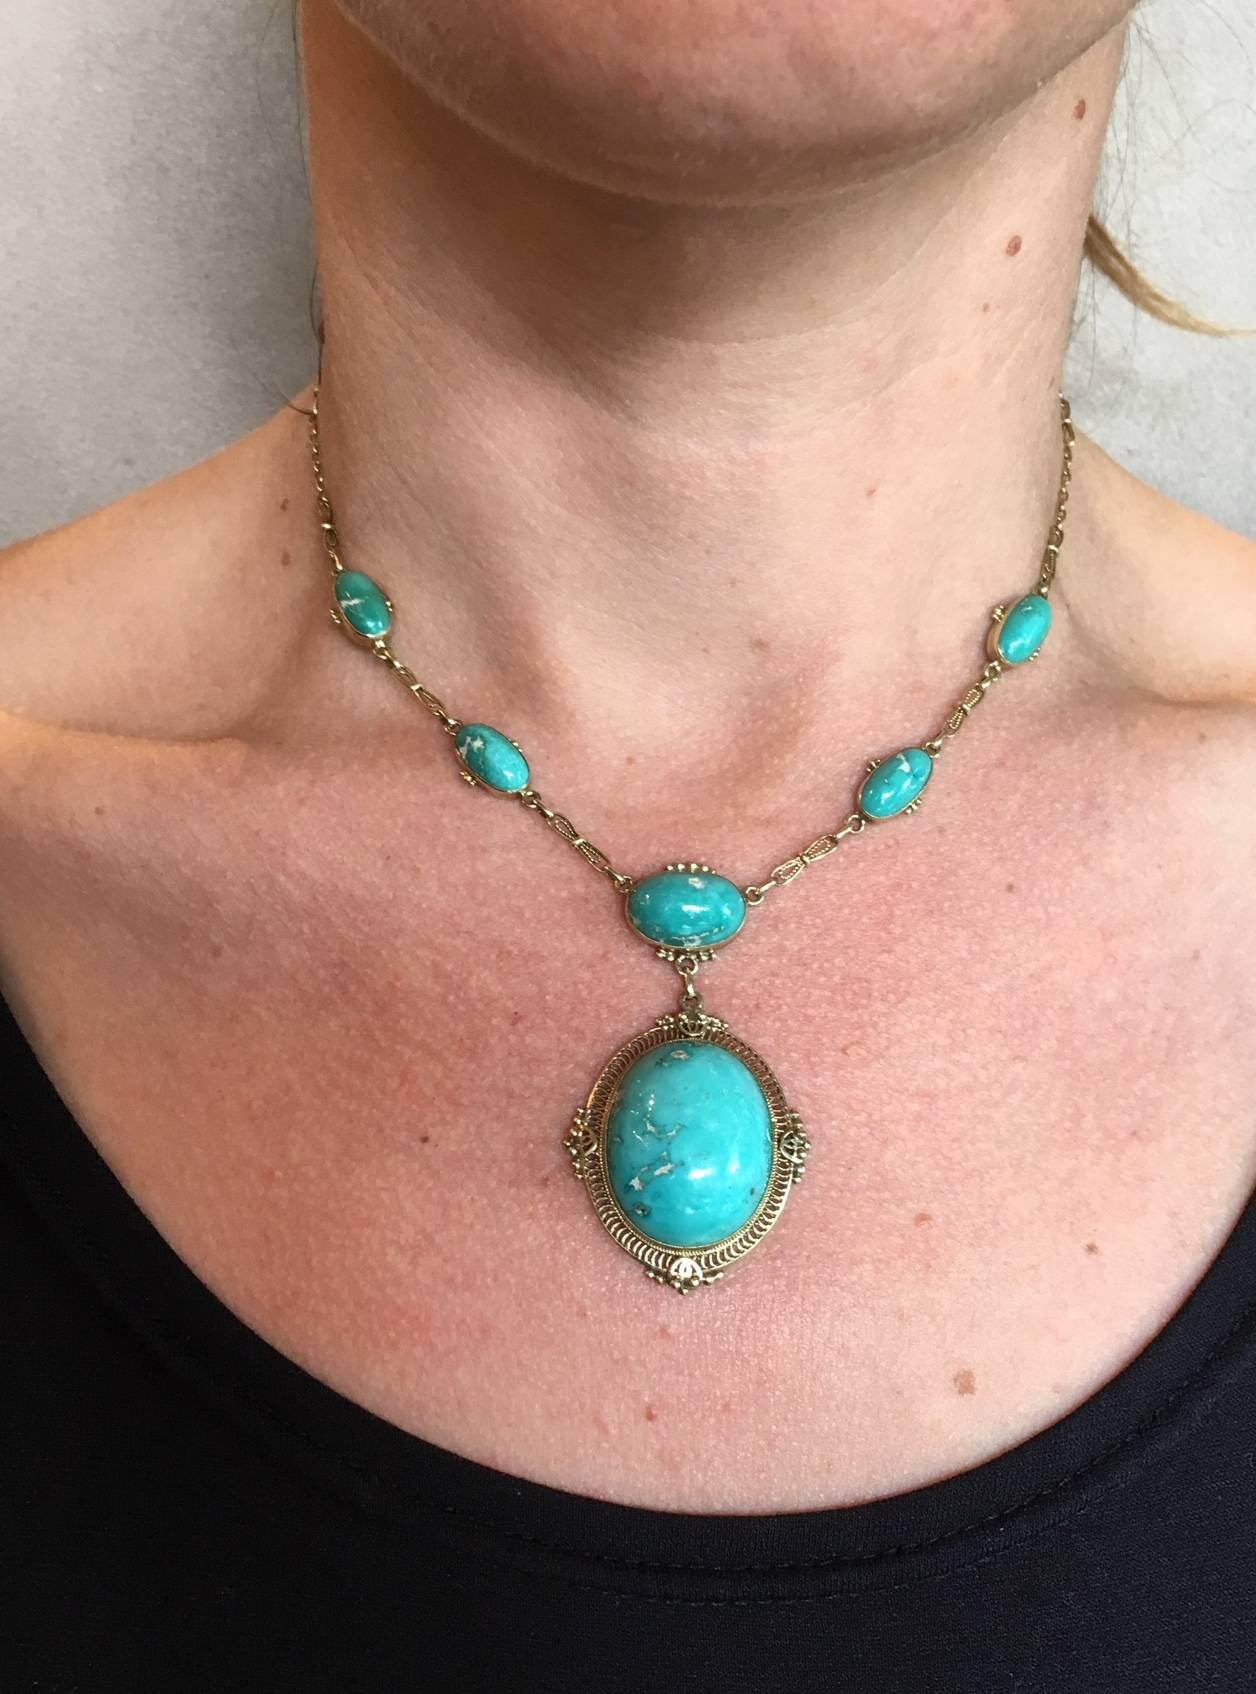 Women's Antique 14 Karat and Turquoise Necklace